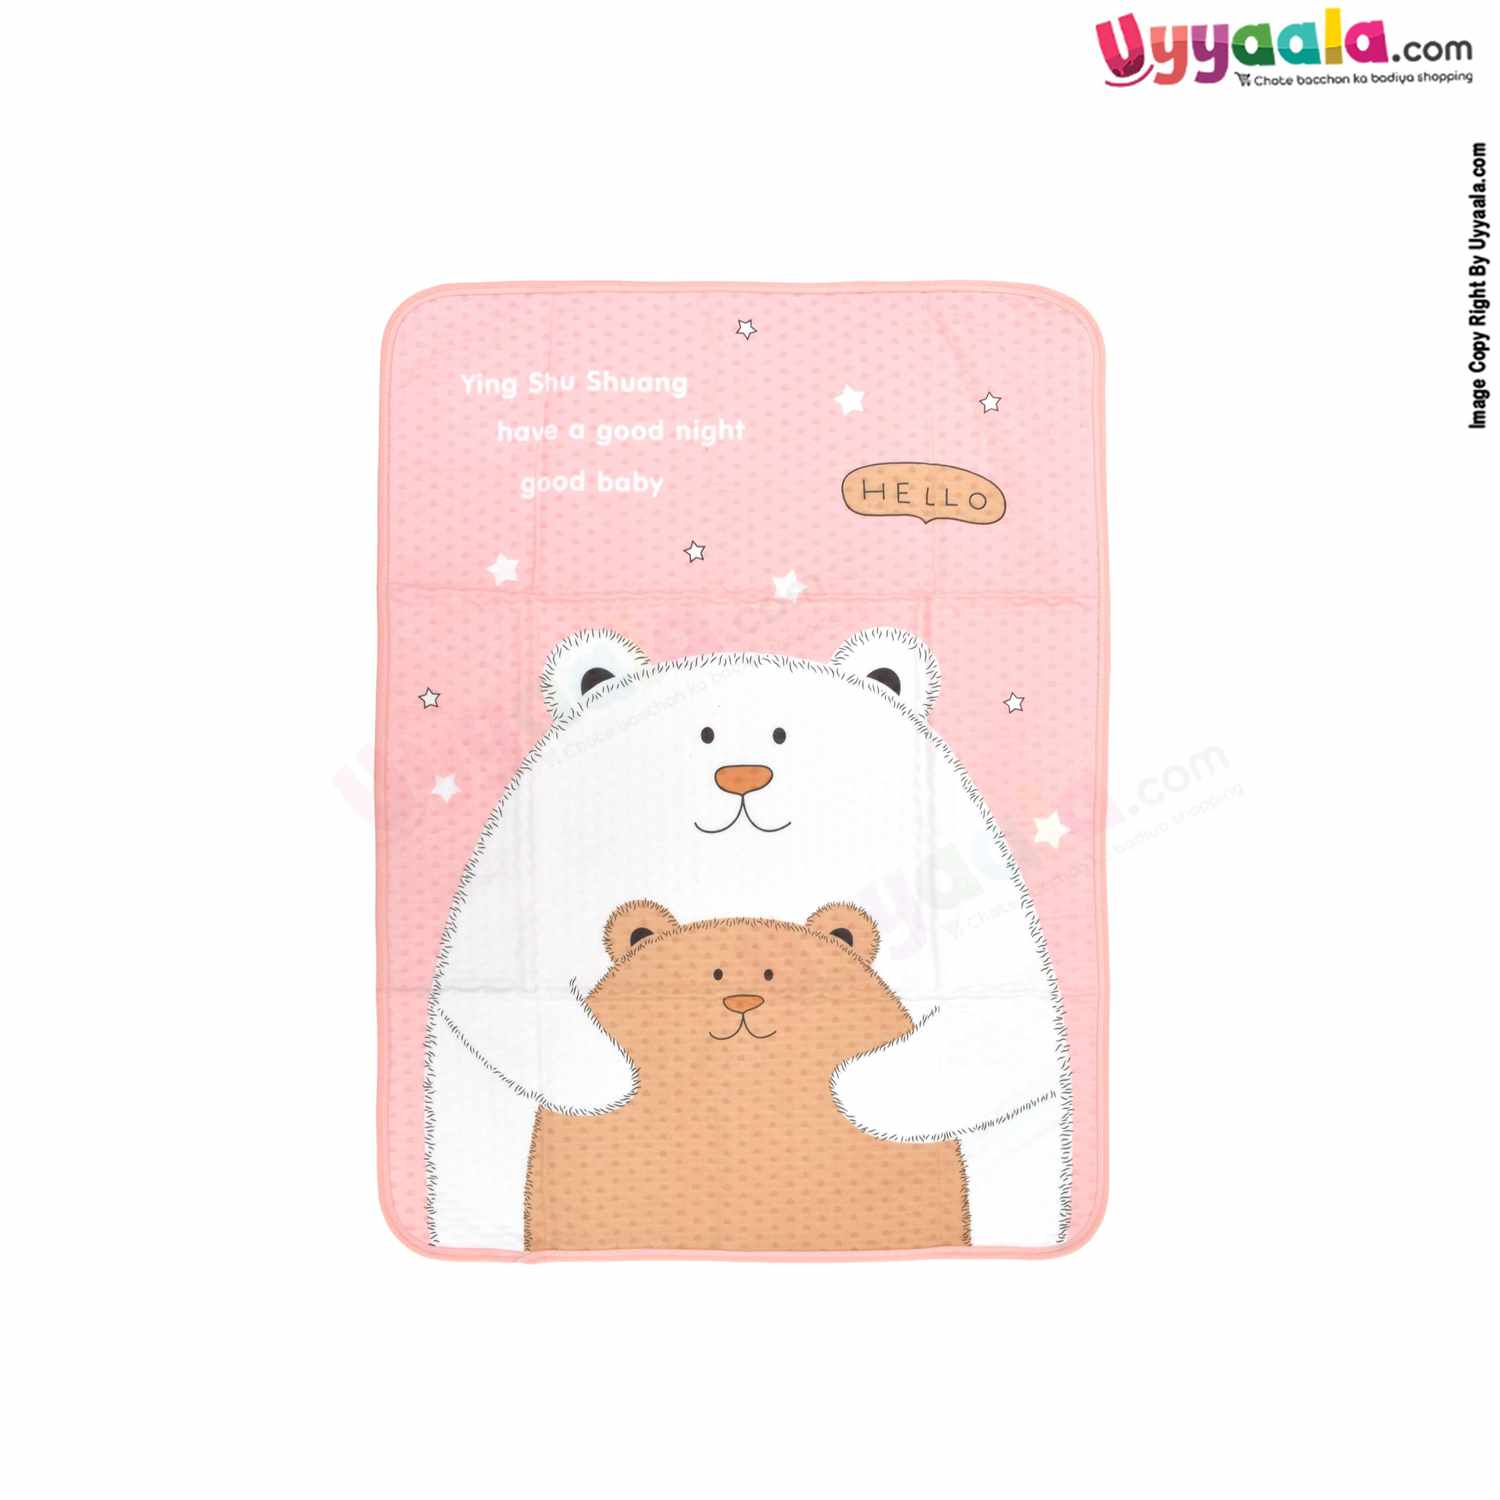 Fancy Premium Baby Mattress Protector Dry Sheet Water Proof, One Side Cotton & Another Side PVC for Babies with Bear Print, Medium Size(80*60cm)